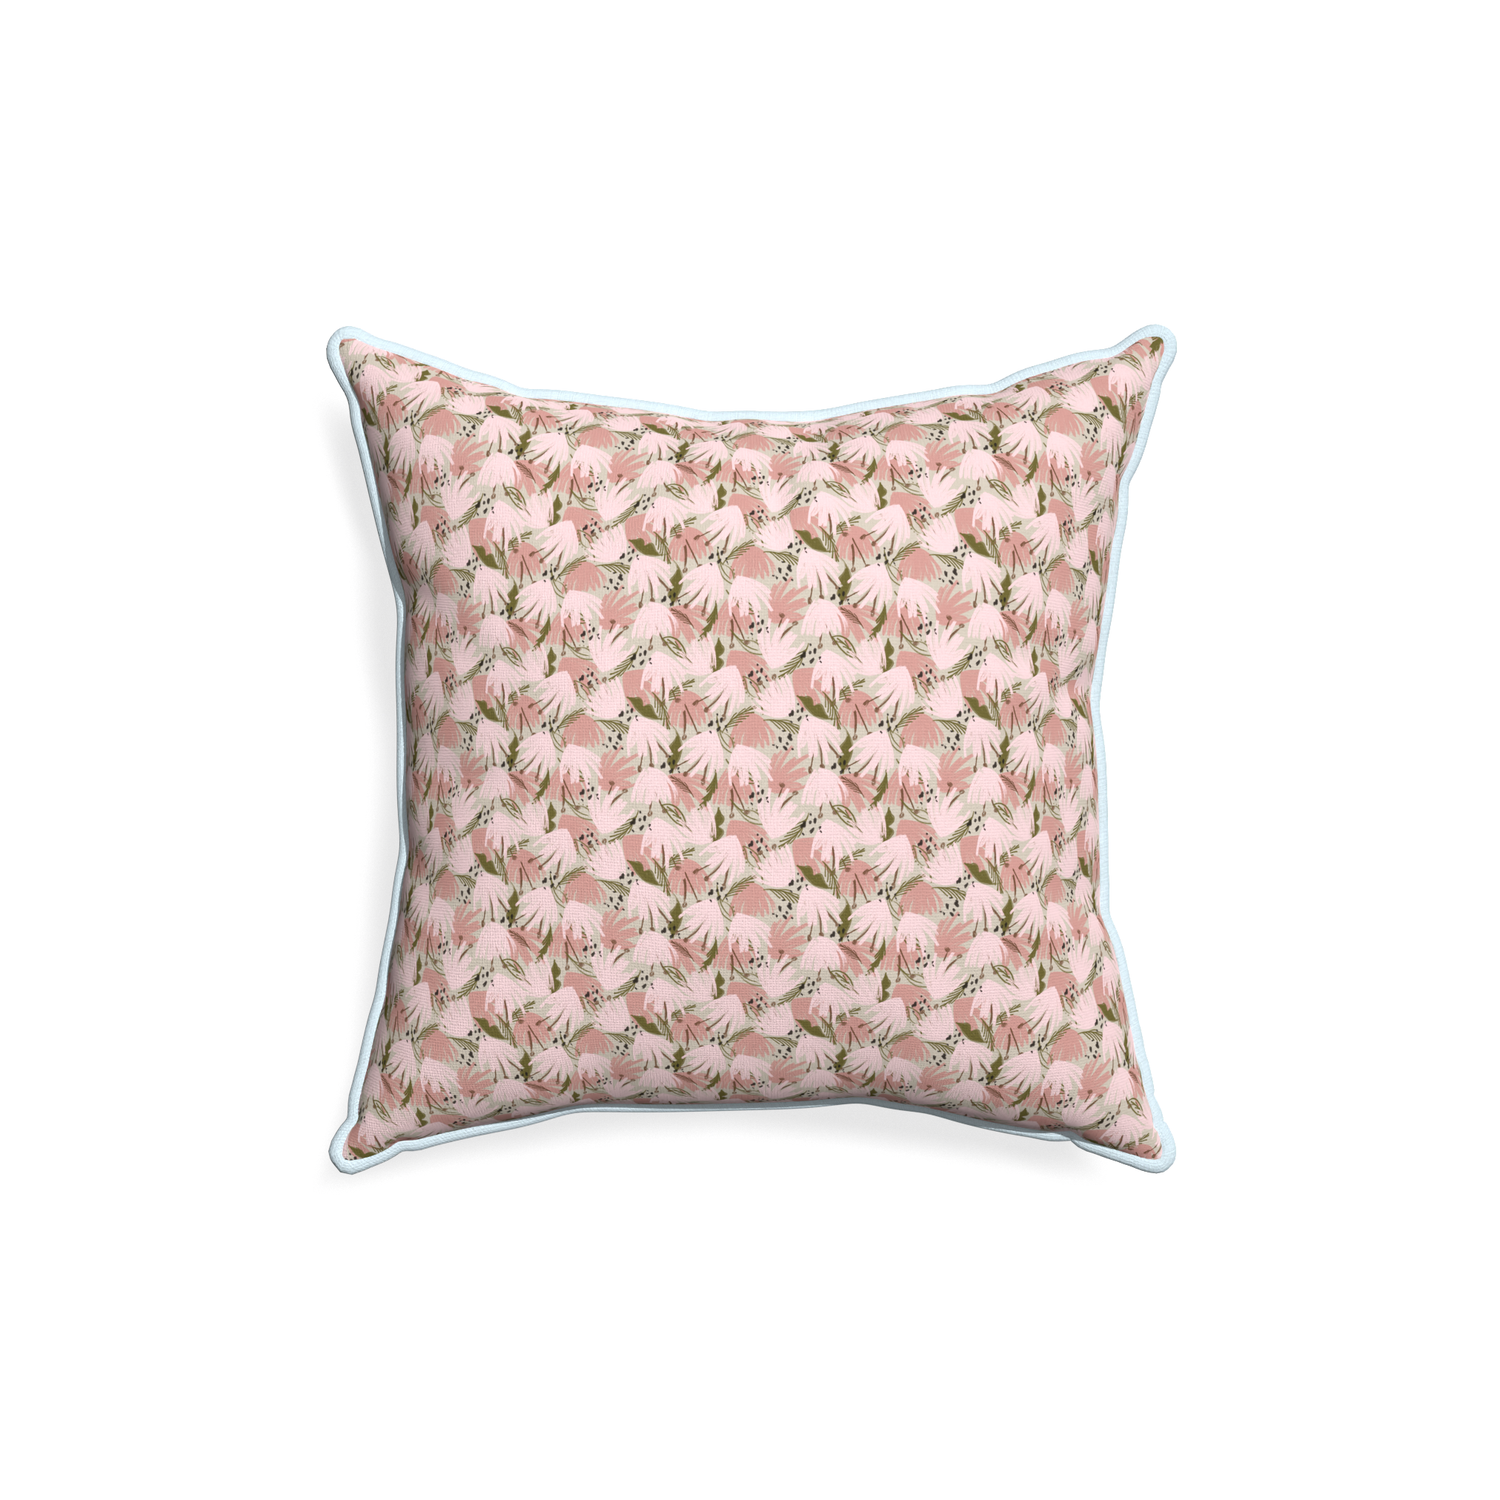 18-square eden pink custom pink floralpillow with powder piping on white background